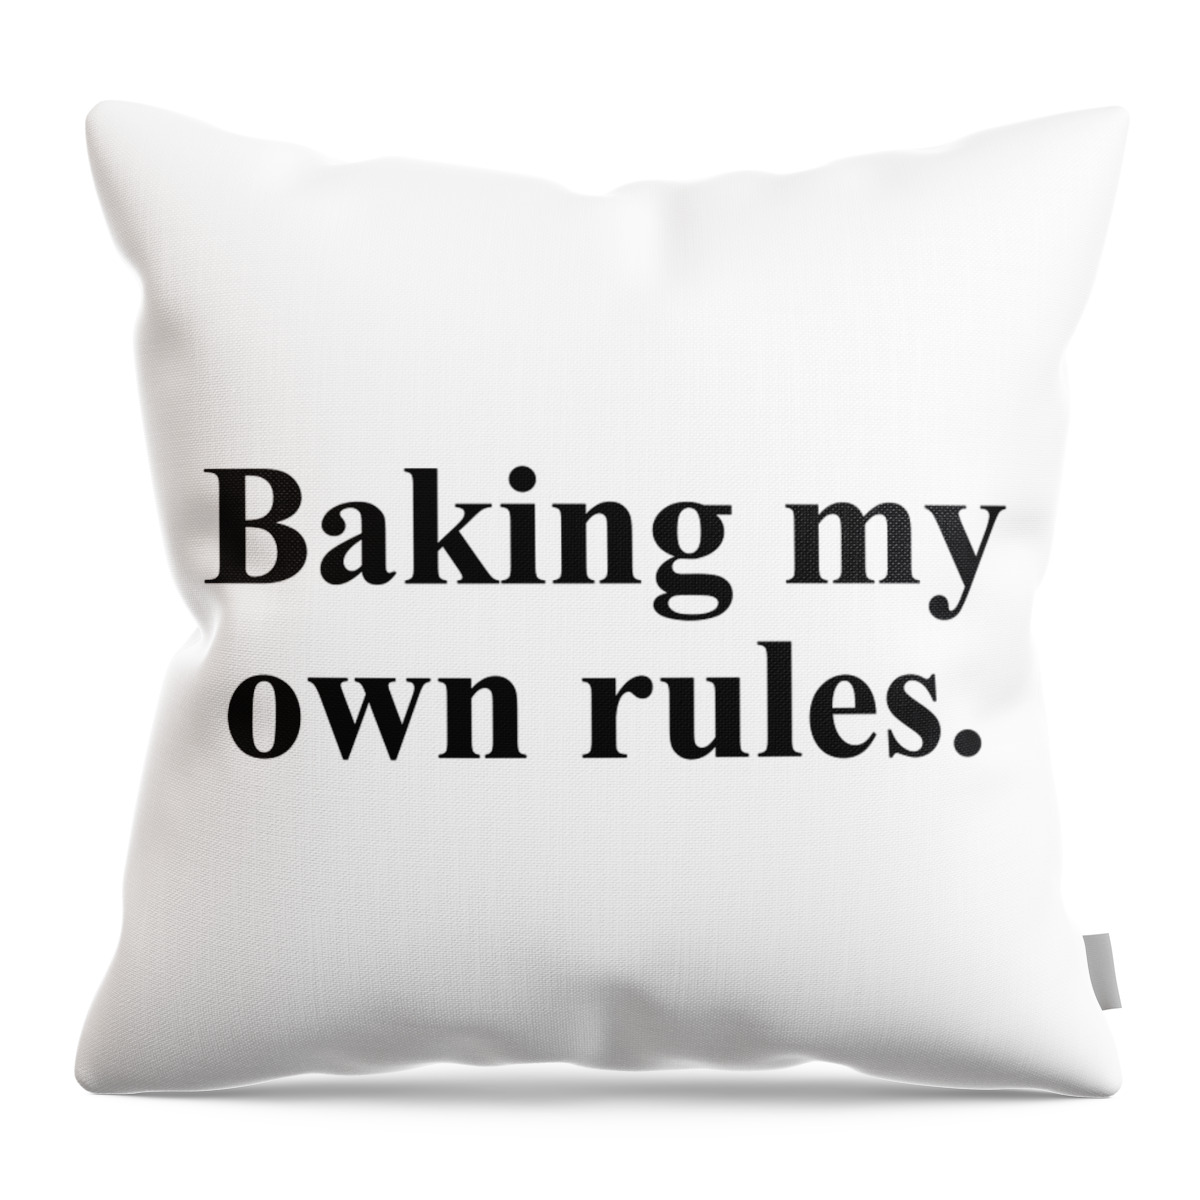 Baker Throw Pillow featuring the digital art Baking my own rules. by Jeff Creation